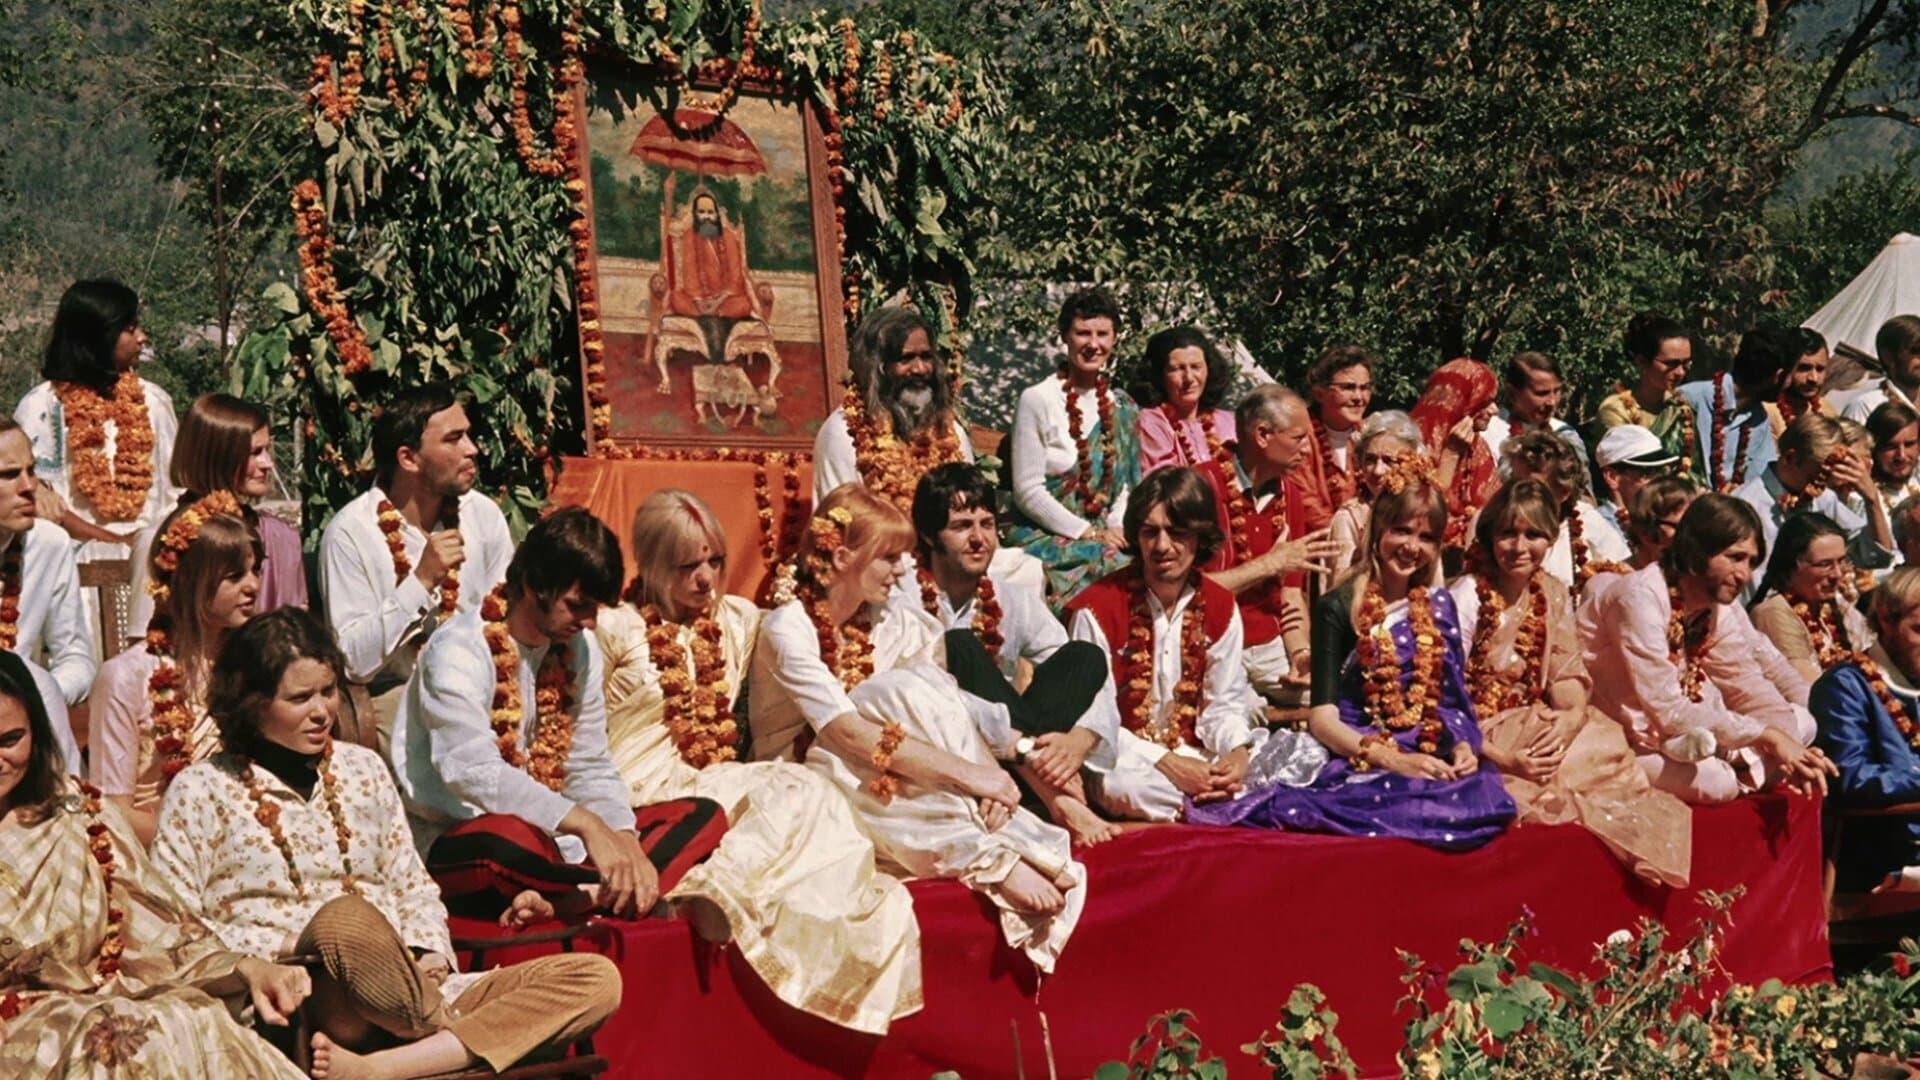 The Beatles and India backdrop